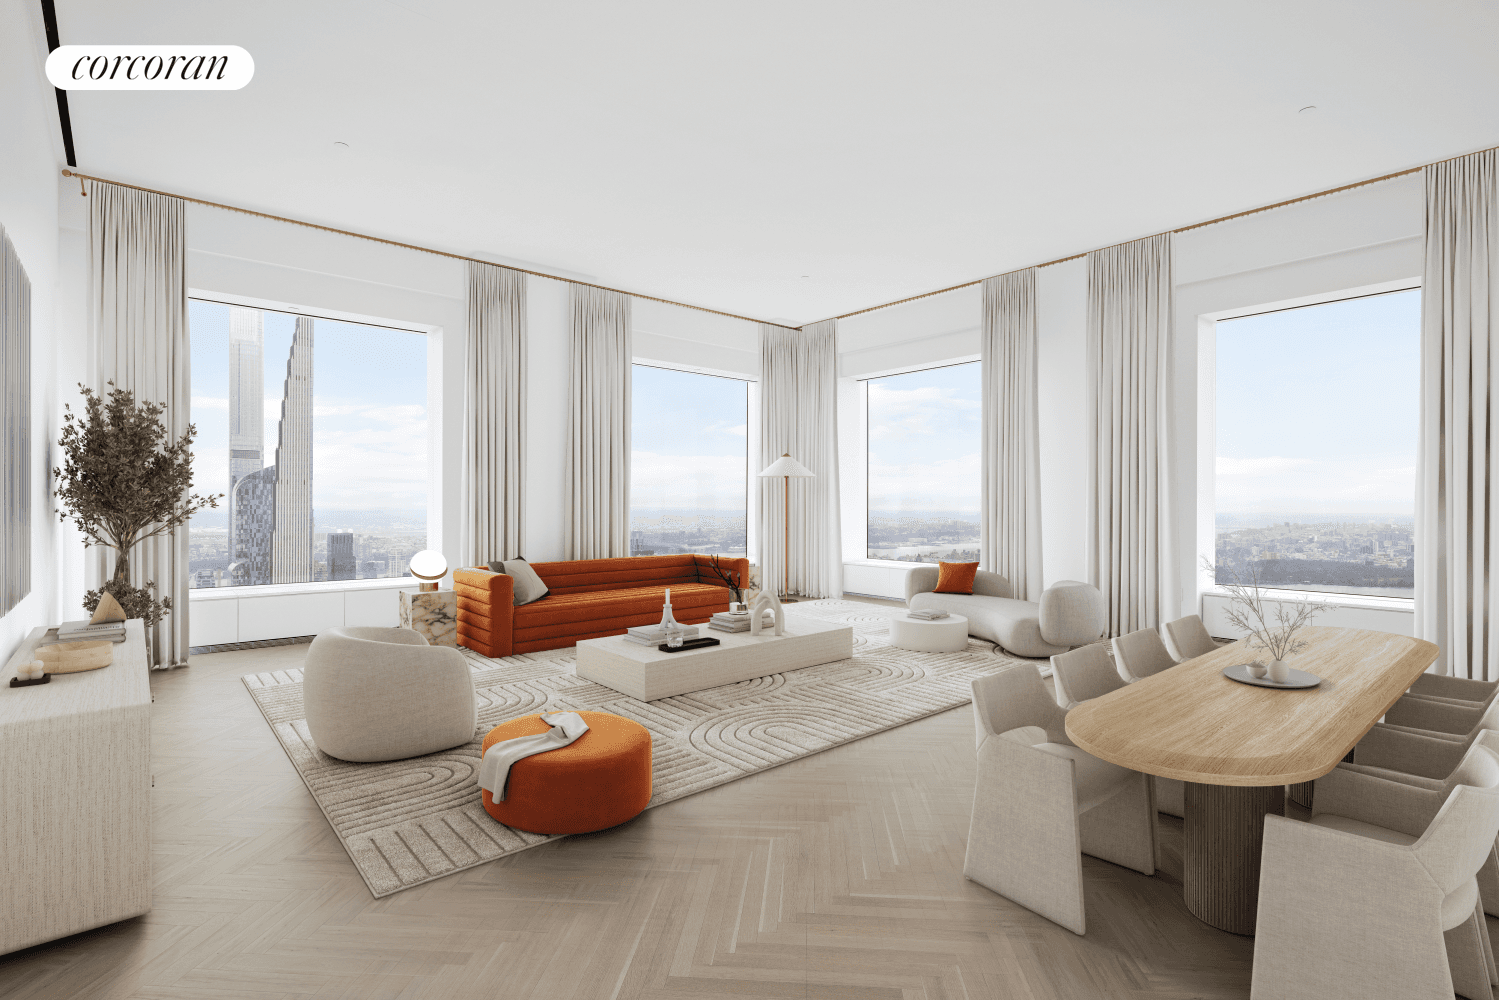 Residence 71B at 432 Park AvenueFour Bedrooms Four Baths Library Powder Room 4, 054 sqftResidence 71B at 432 Park Avenue is an impeccable half floor residence featuring a perfect balance ...